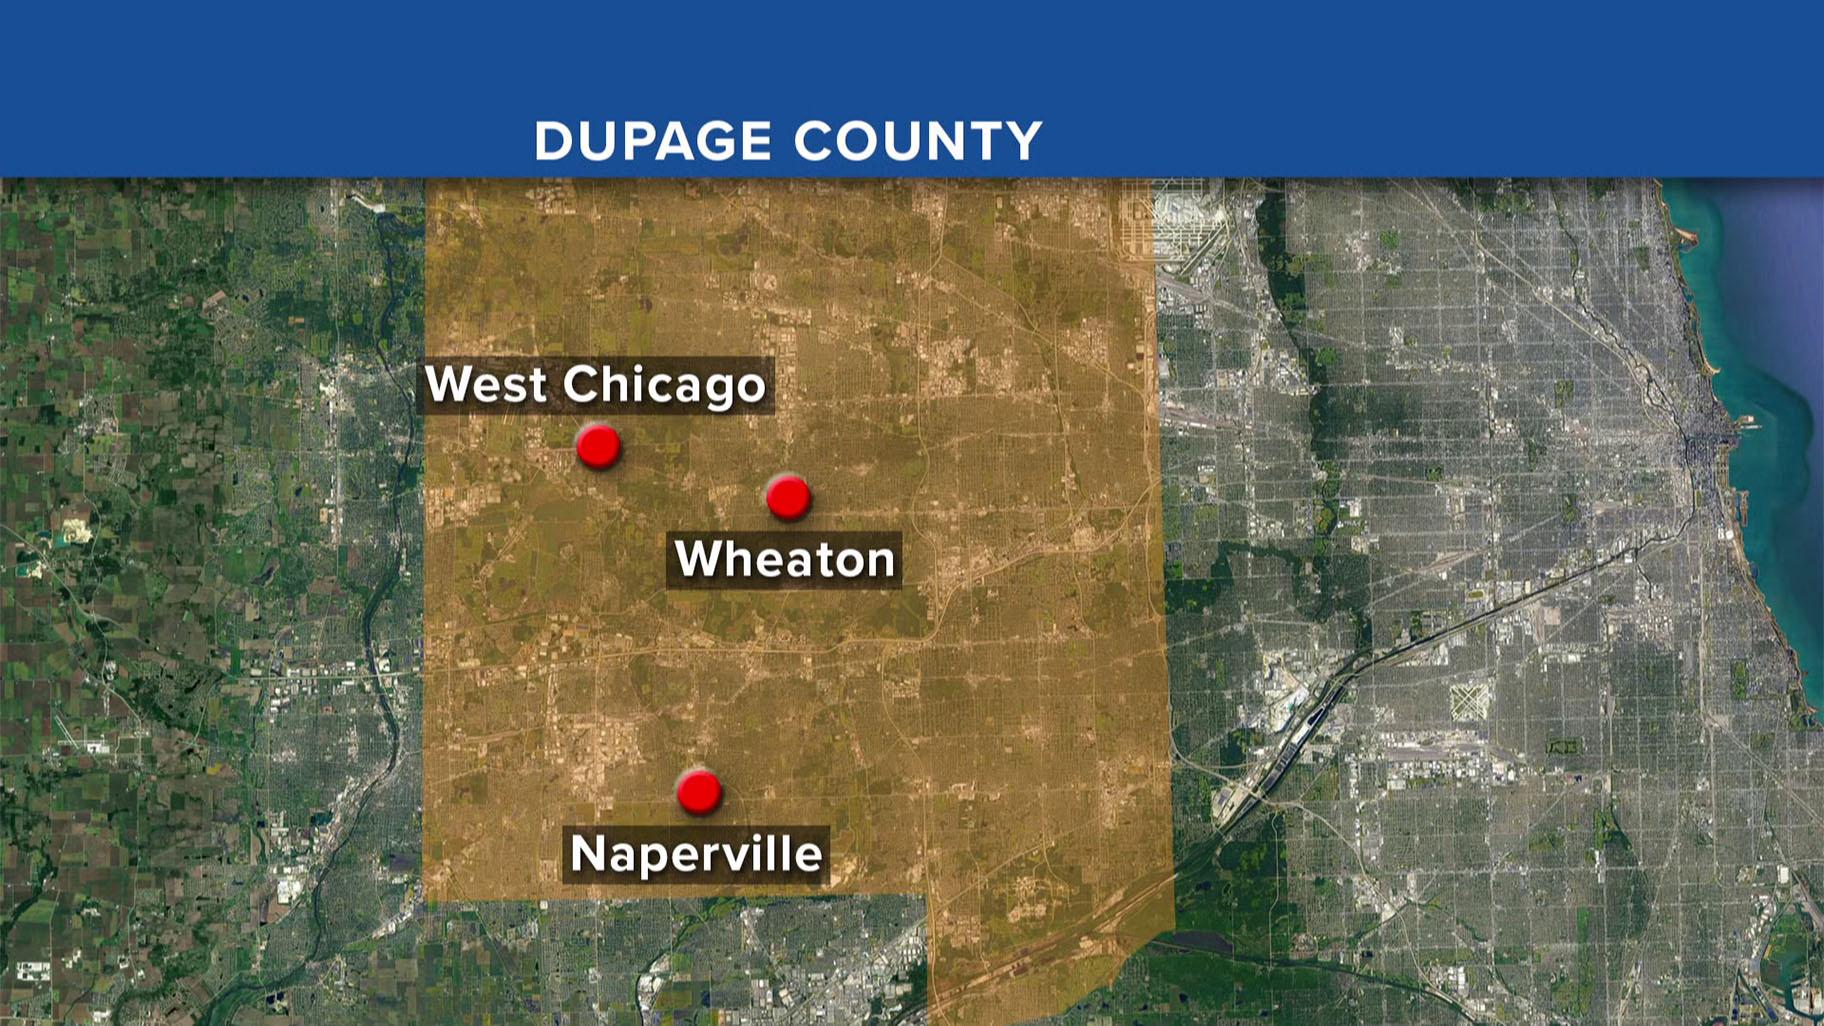 West Chicago would be home to the only two waste transfer facilities in DuPage County, under a proposal. (WTTW News)